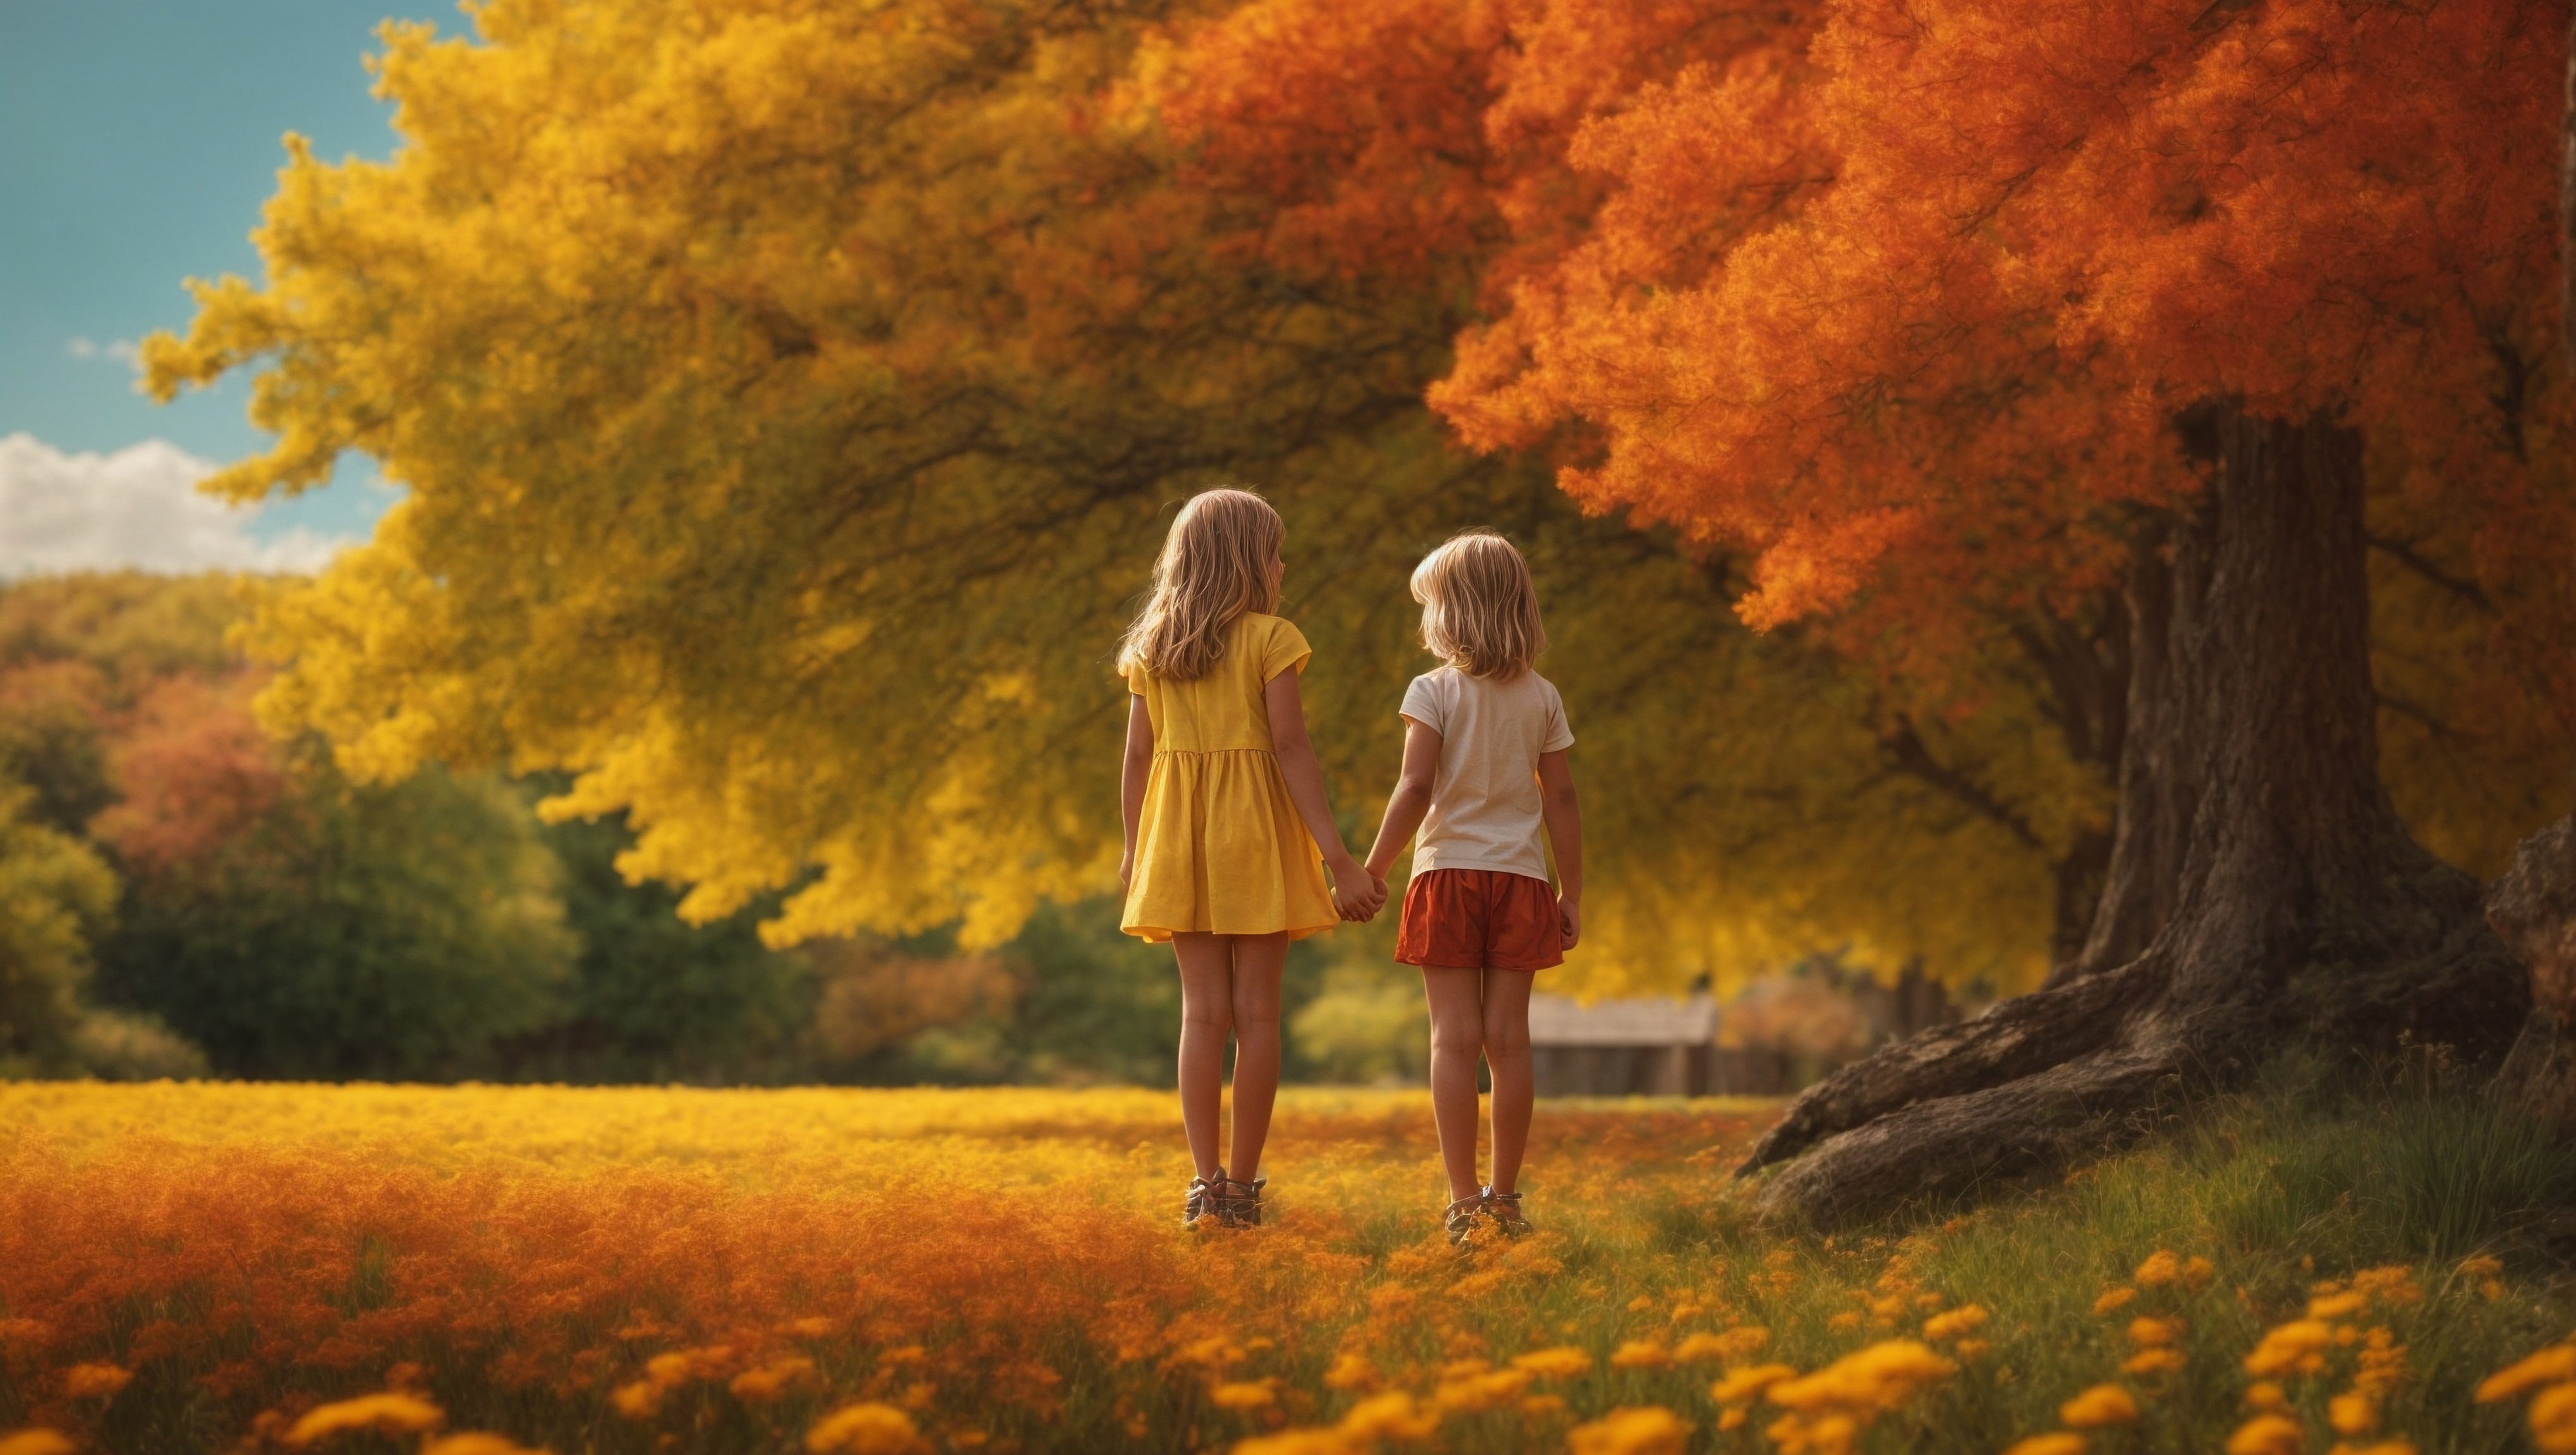 Free photo Two young girls standing in an autumn field with yellow flowers.